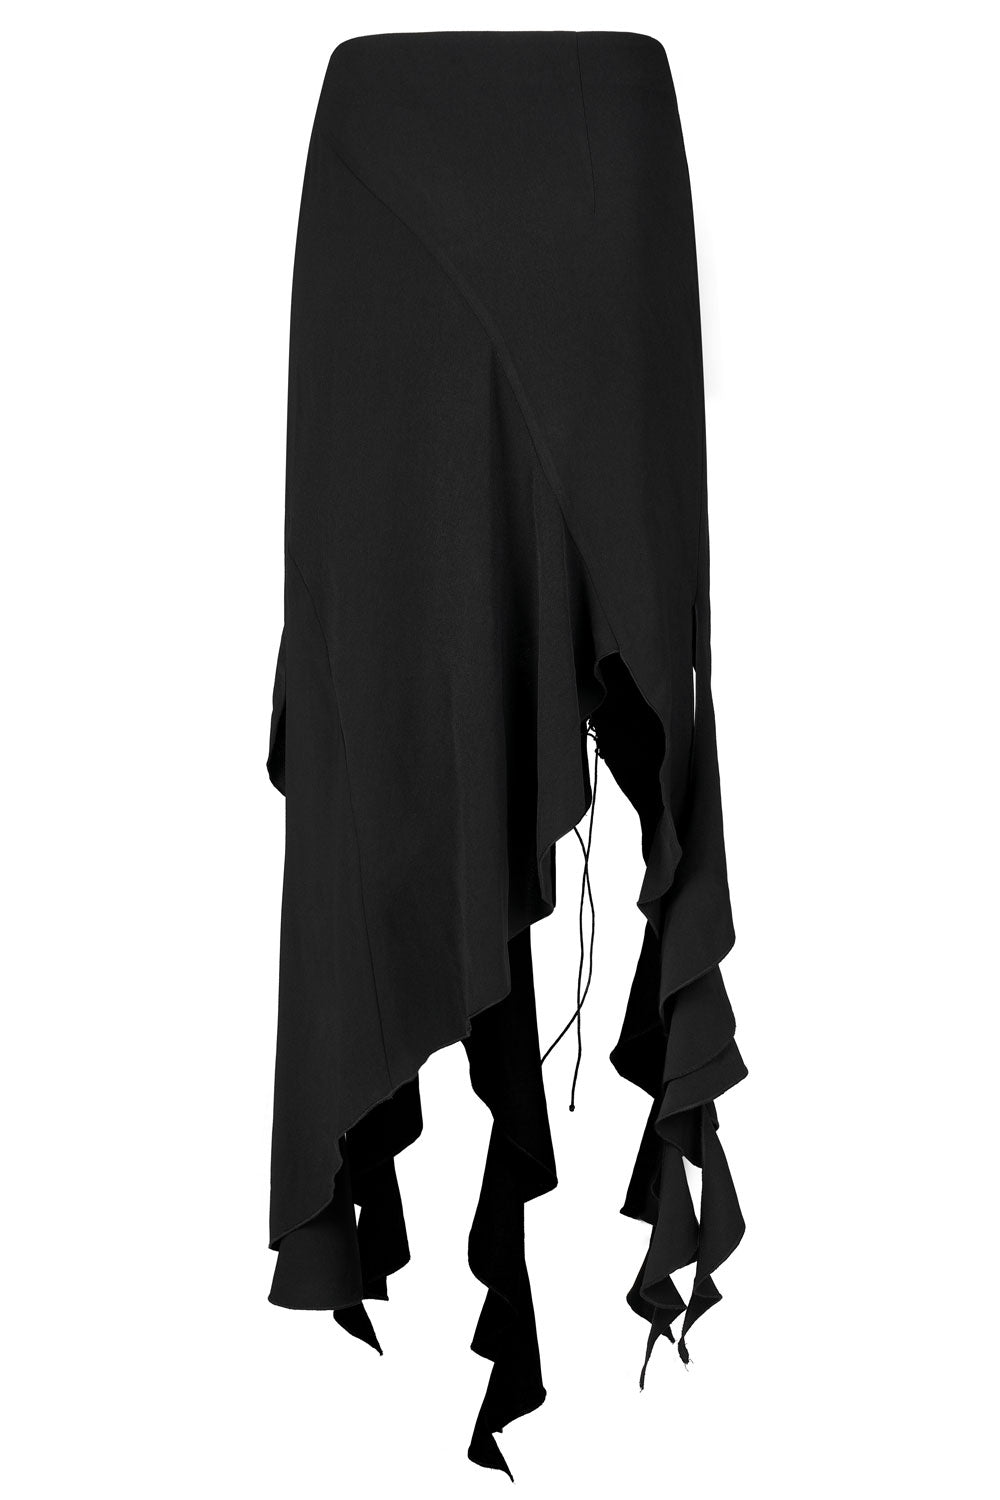 Sea Witch Maxi Skirt